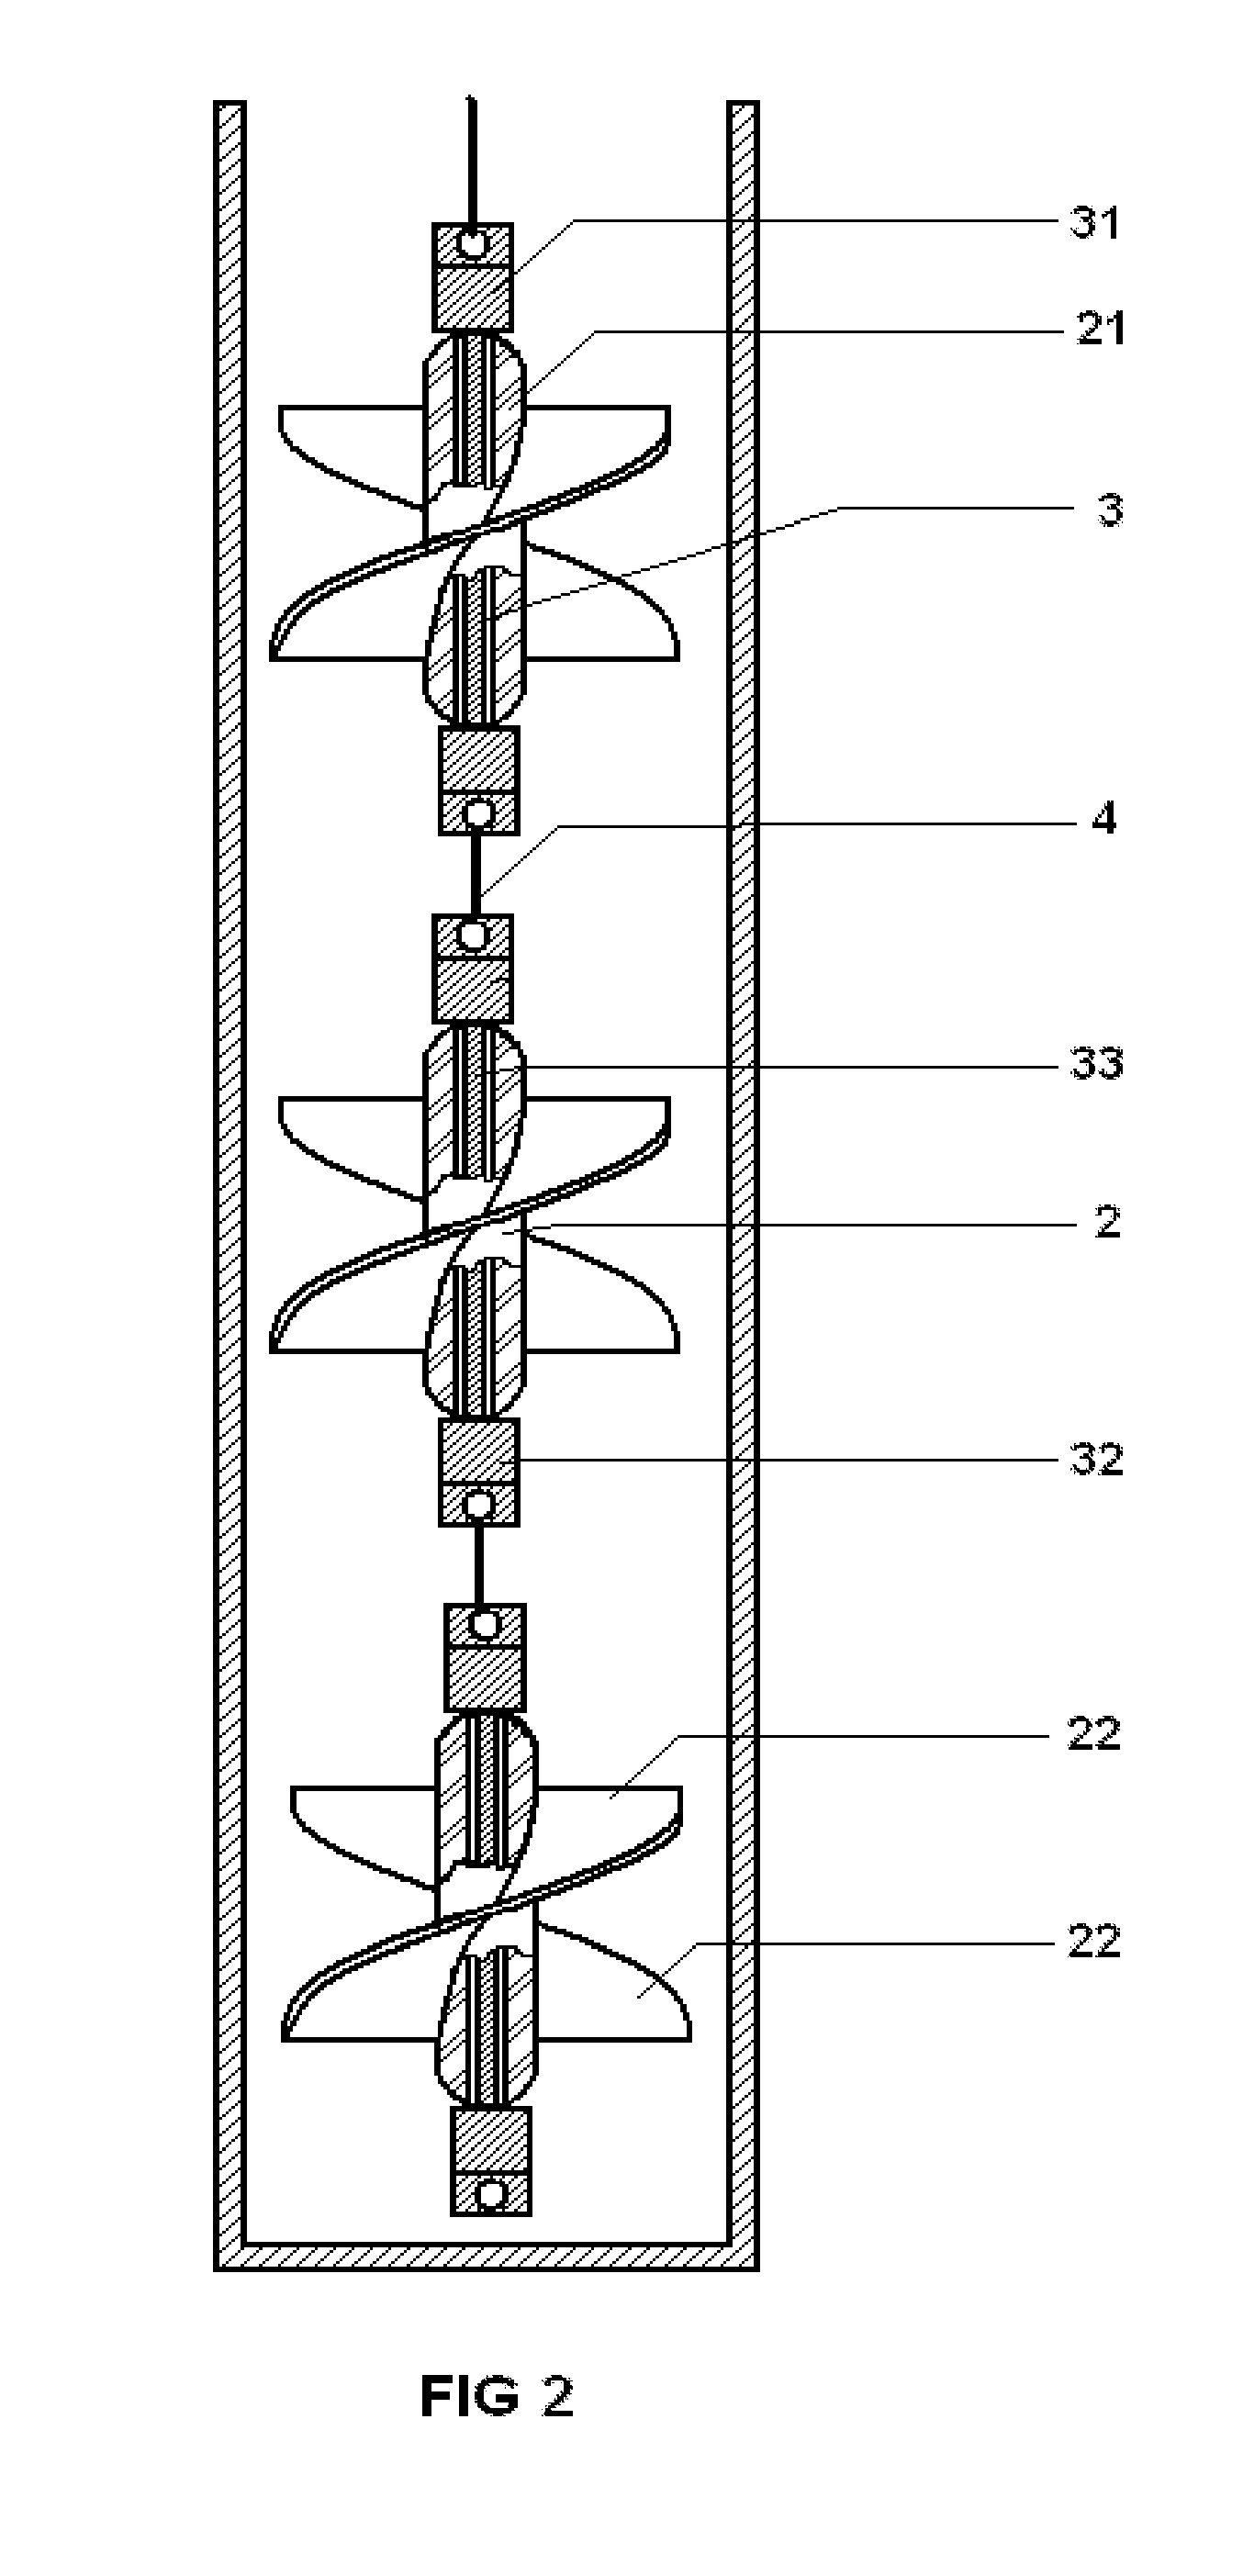 Apparatus and method for loading particulate material into vertical tubes